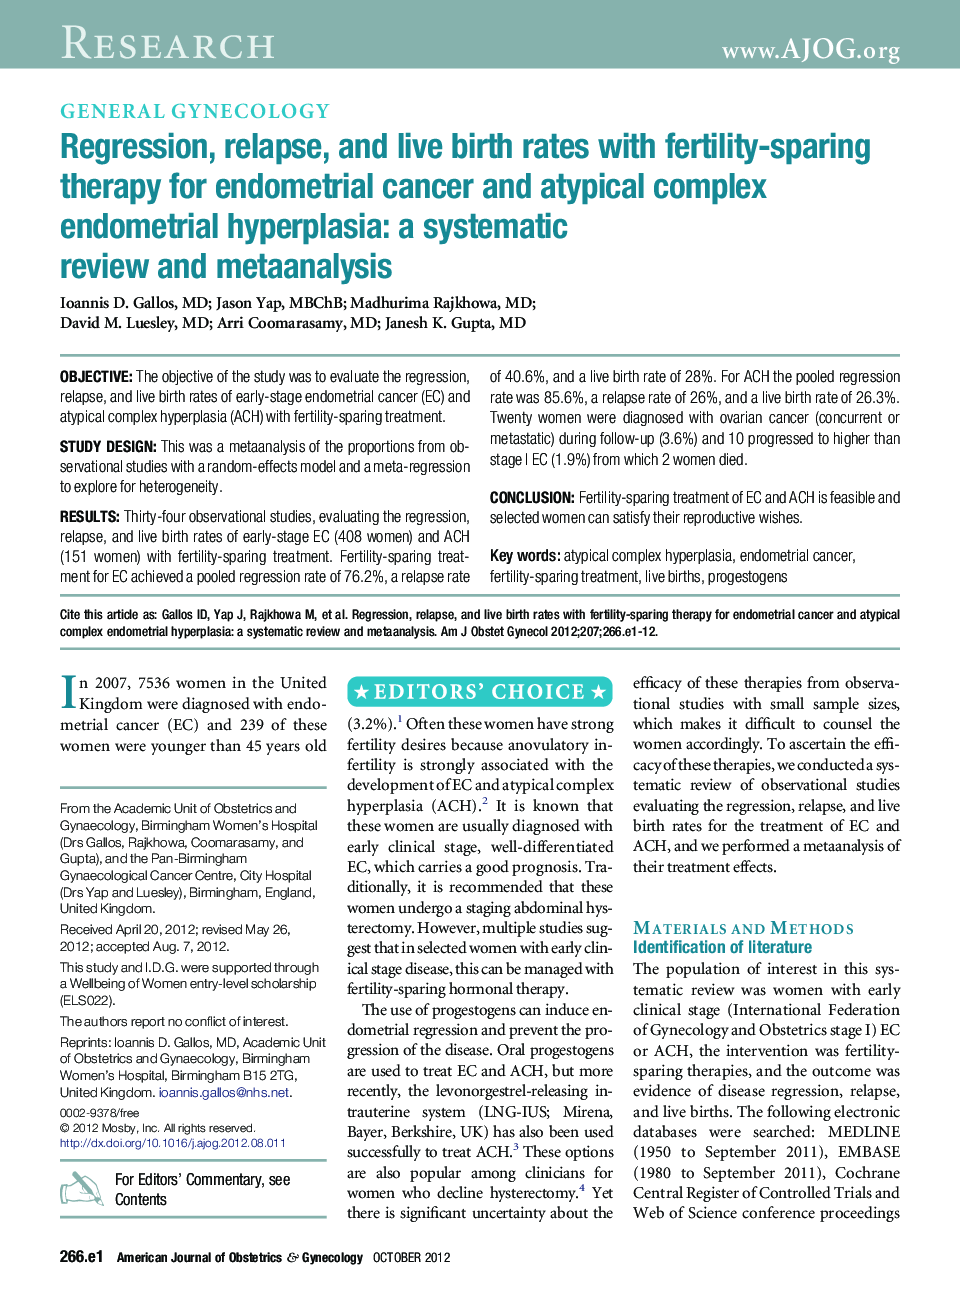 Regression, relapse, and live birth rates with fertility-sparing therapy for endometrial cancer and atypical complex endometrial hyperplasia: a systematic review and metaanalysis